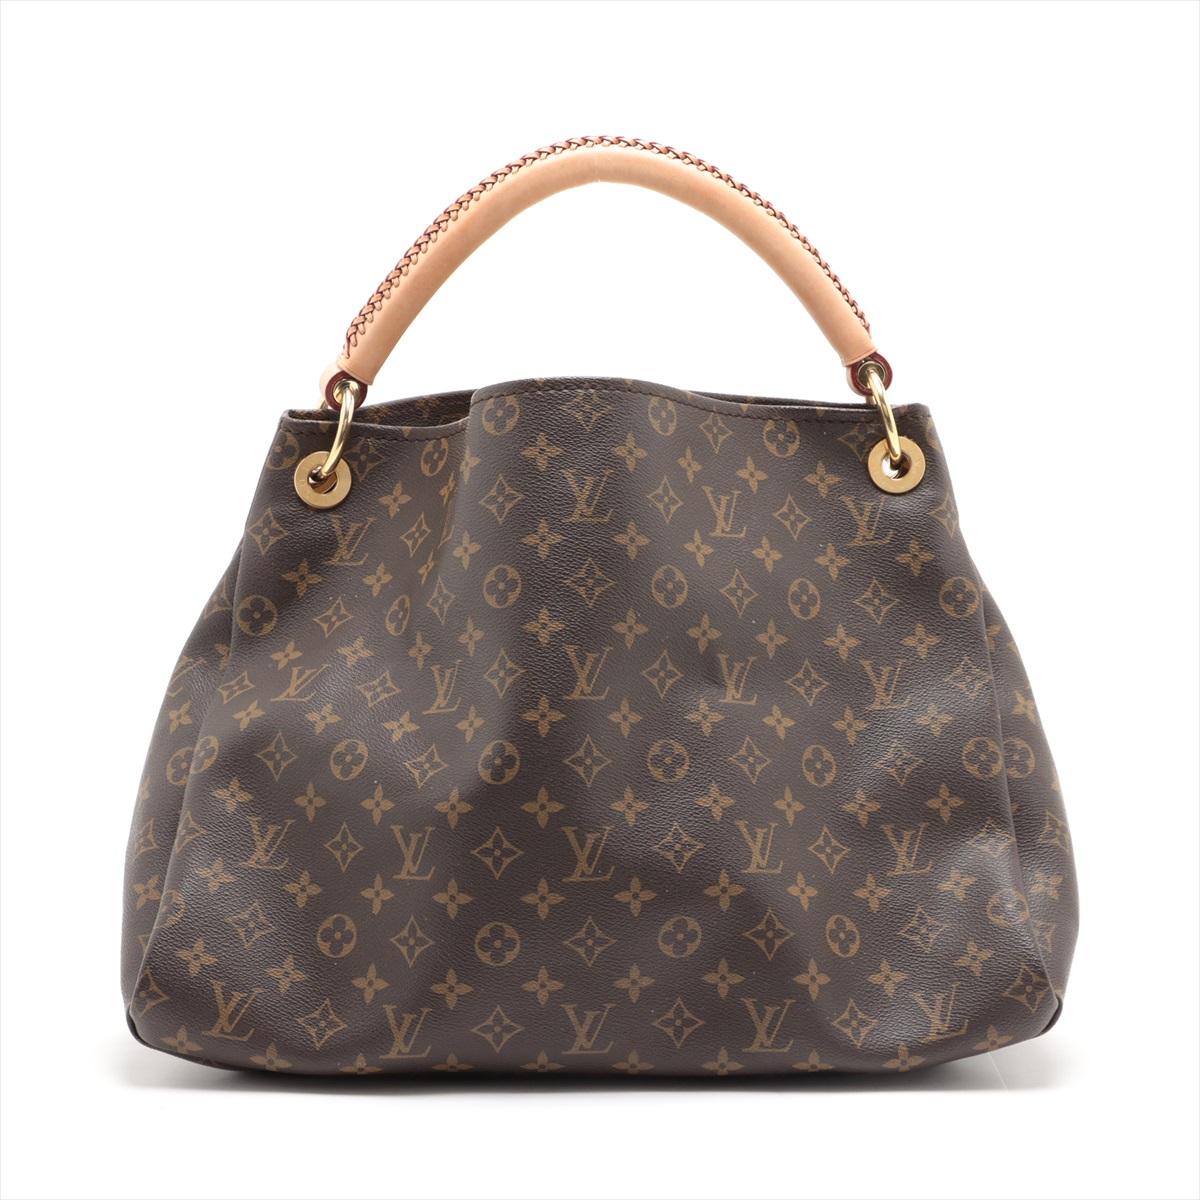 The Louis Vuitton Monogram Artsy MM is a timeless and sophisticated handbag that exudes elegance and style. With its distinctive Monogram pattern and spacious design, the bag seamlessly blends fashion and functionality. The bag features Louis